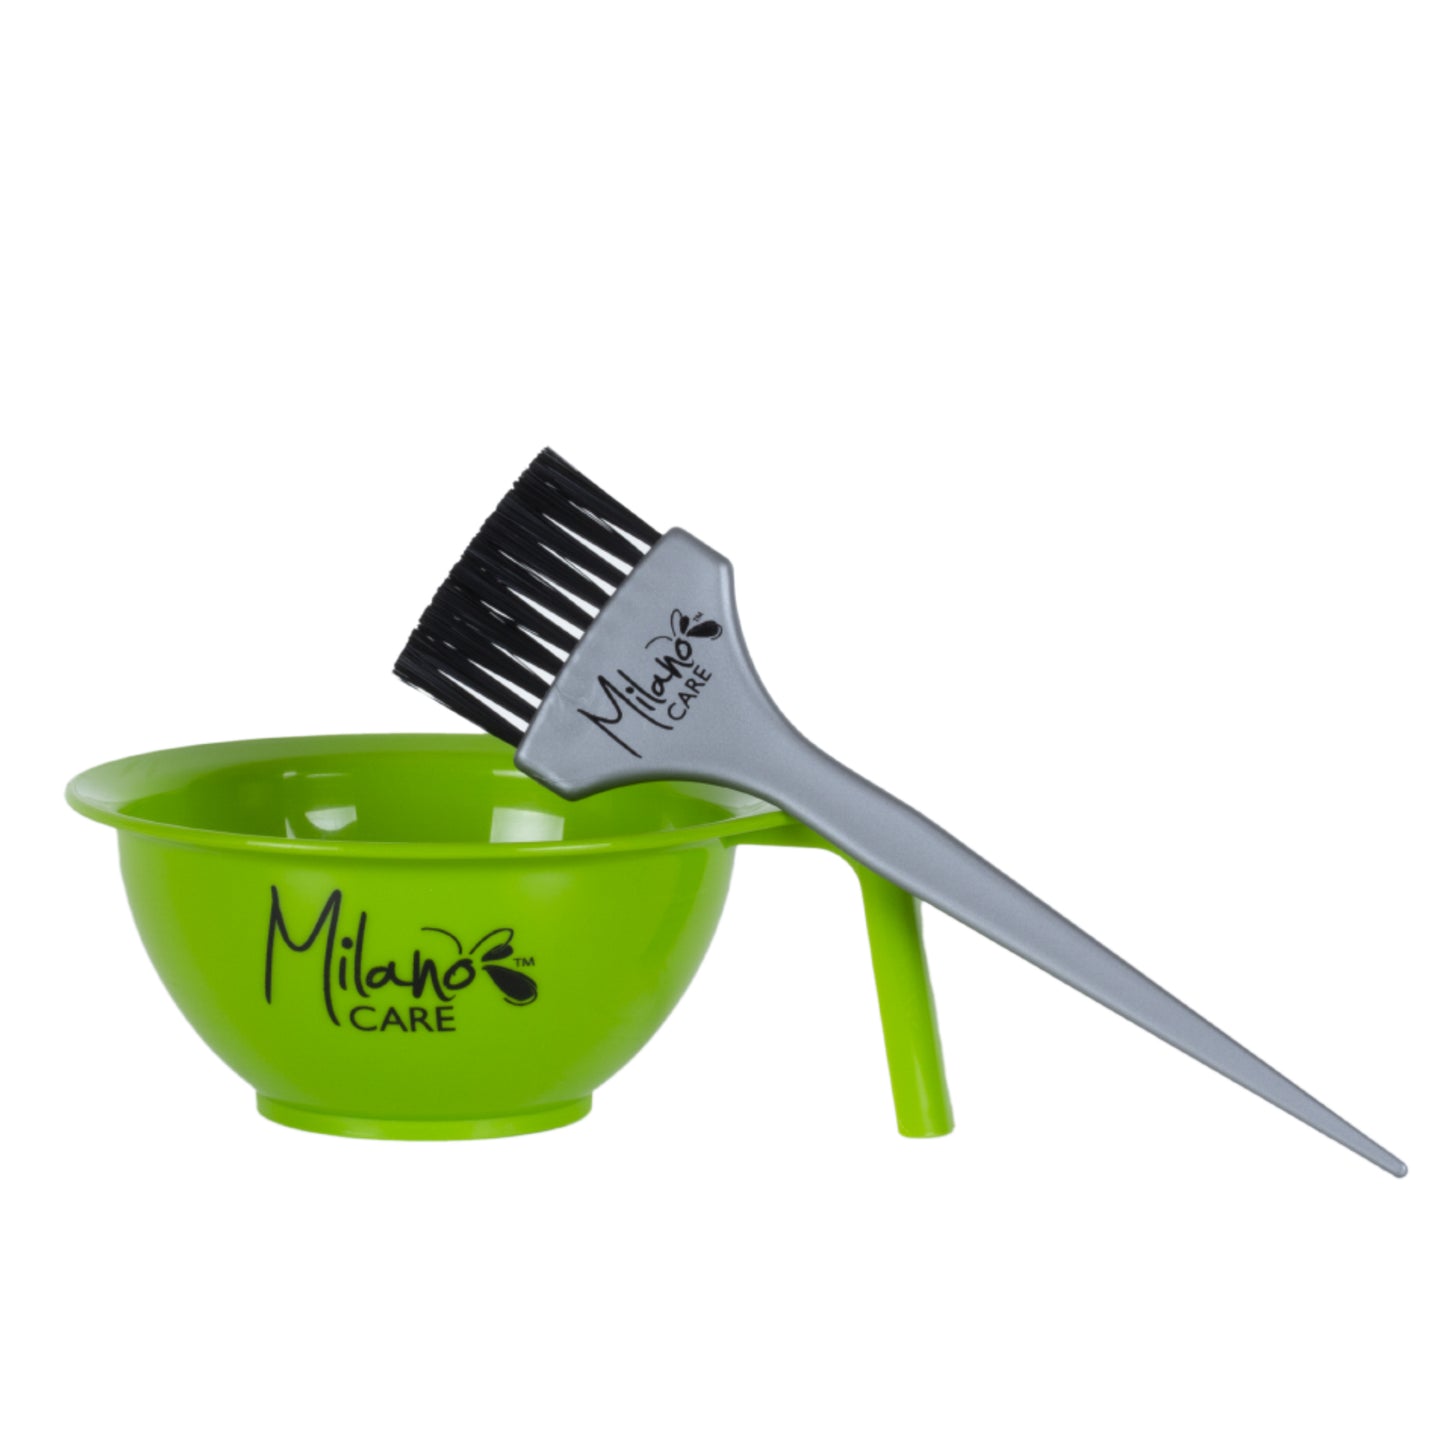 Milano Colore Brush and Bowl